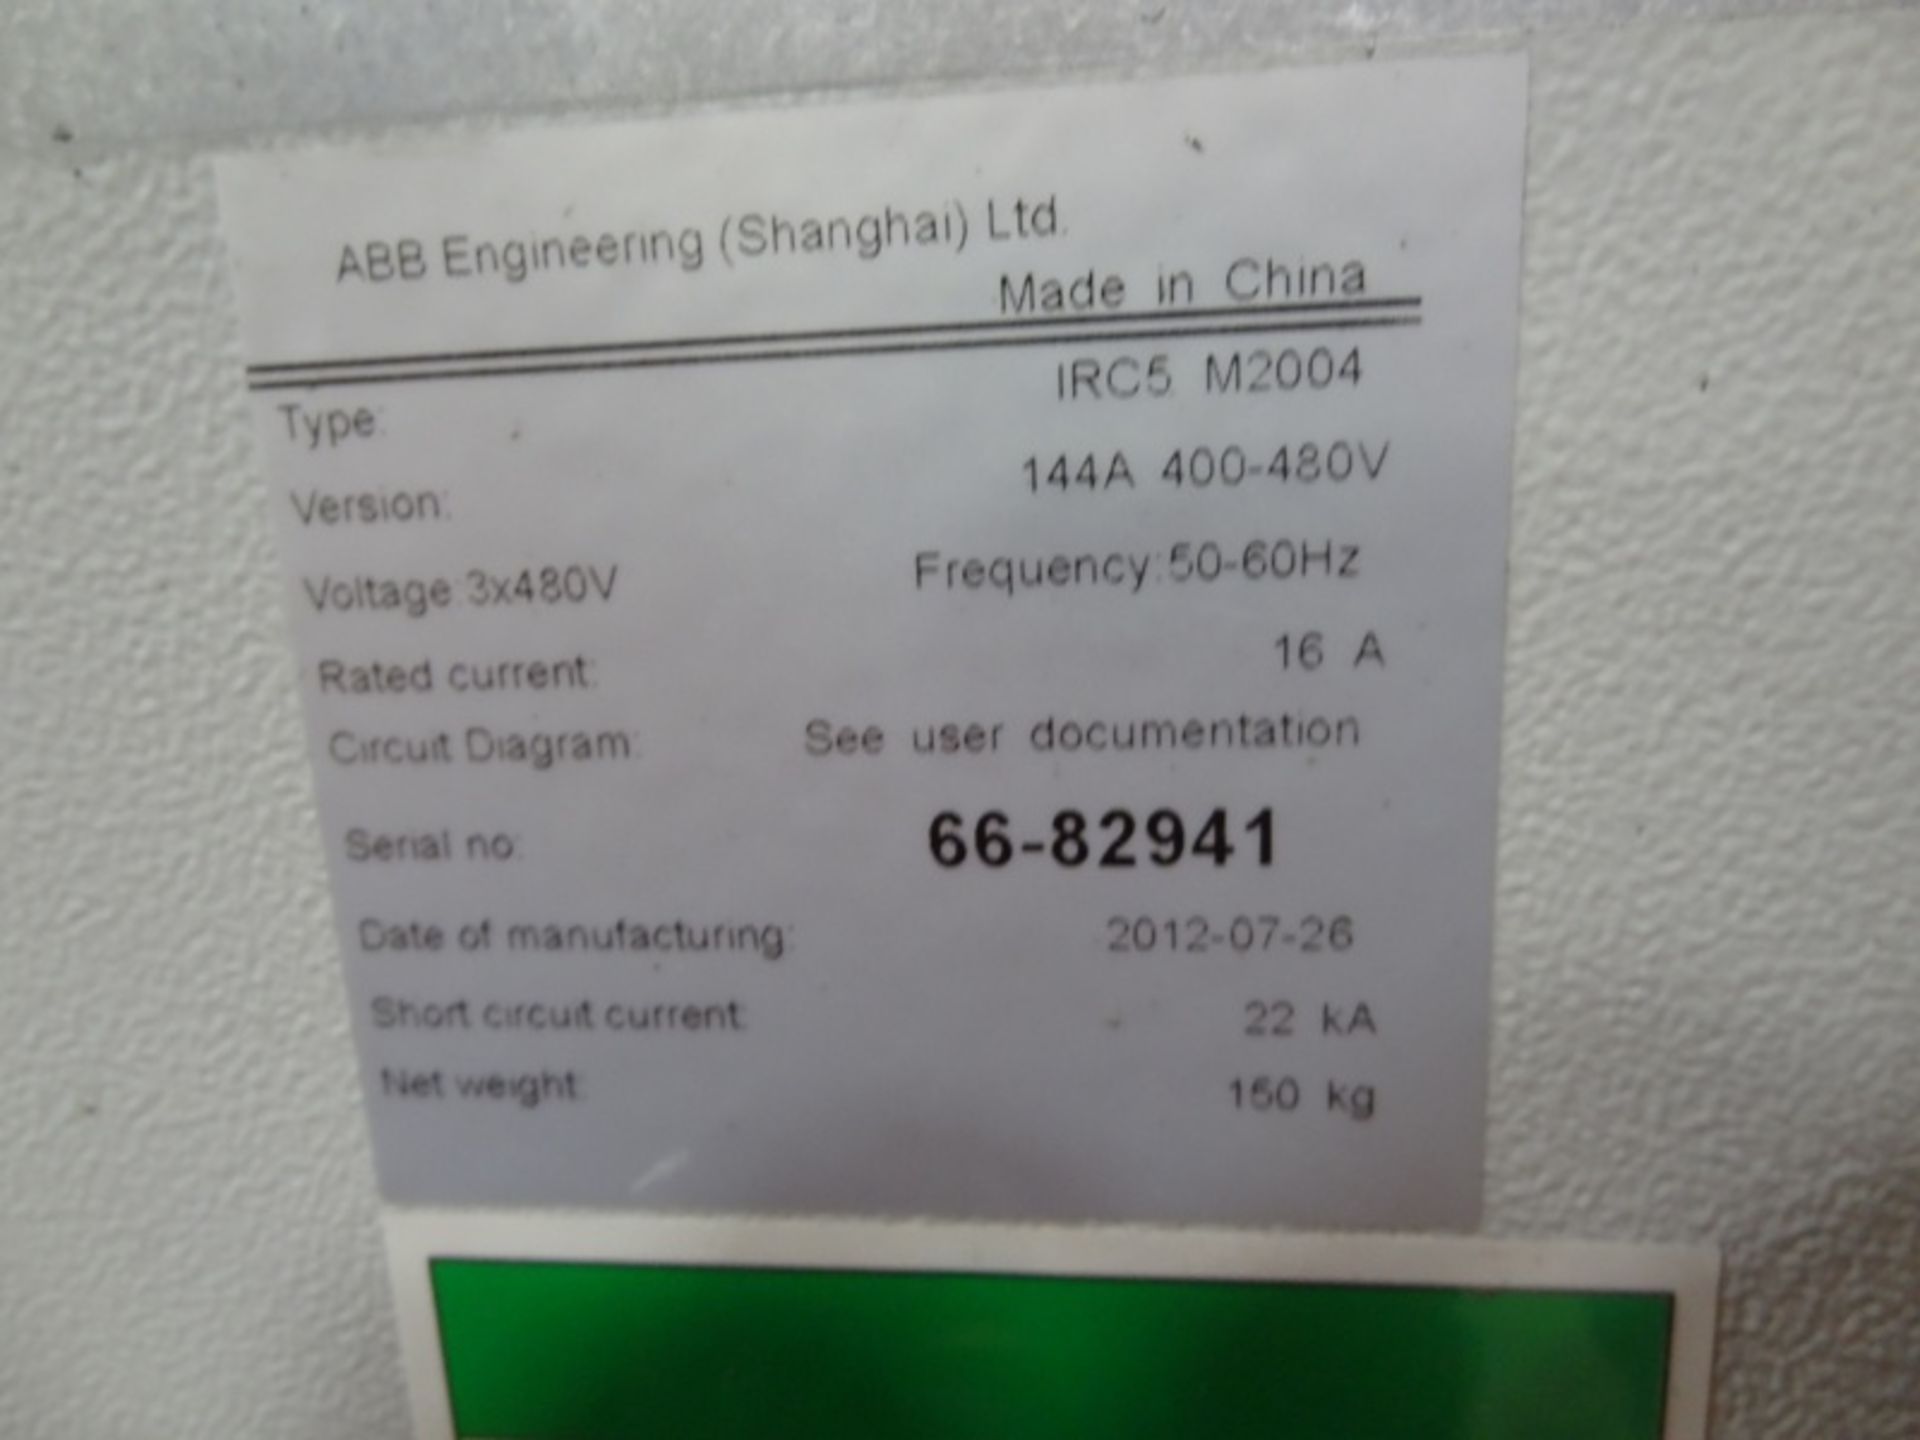 ABB ROBOT IRB 6640-235/2.55 WITH IRC 5 CONTROLS, CABLES & TEACH, YEAR 2012, SM 66-82941, LOCATION MI - Image 3 of 3